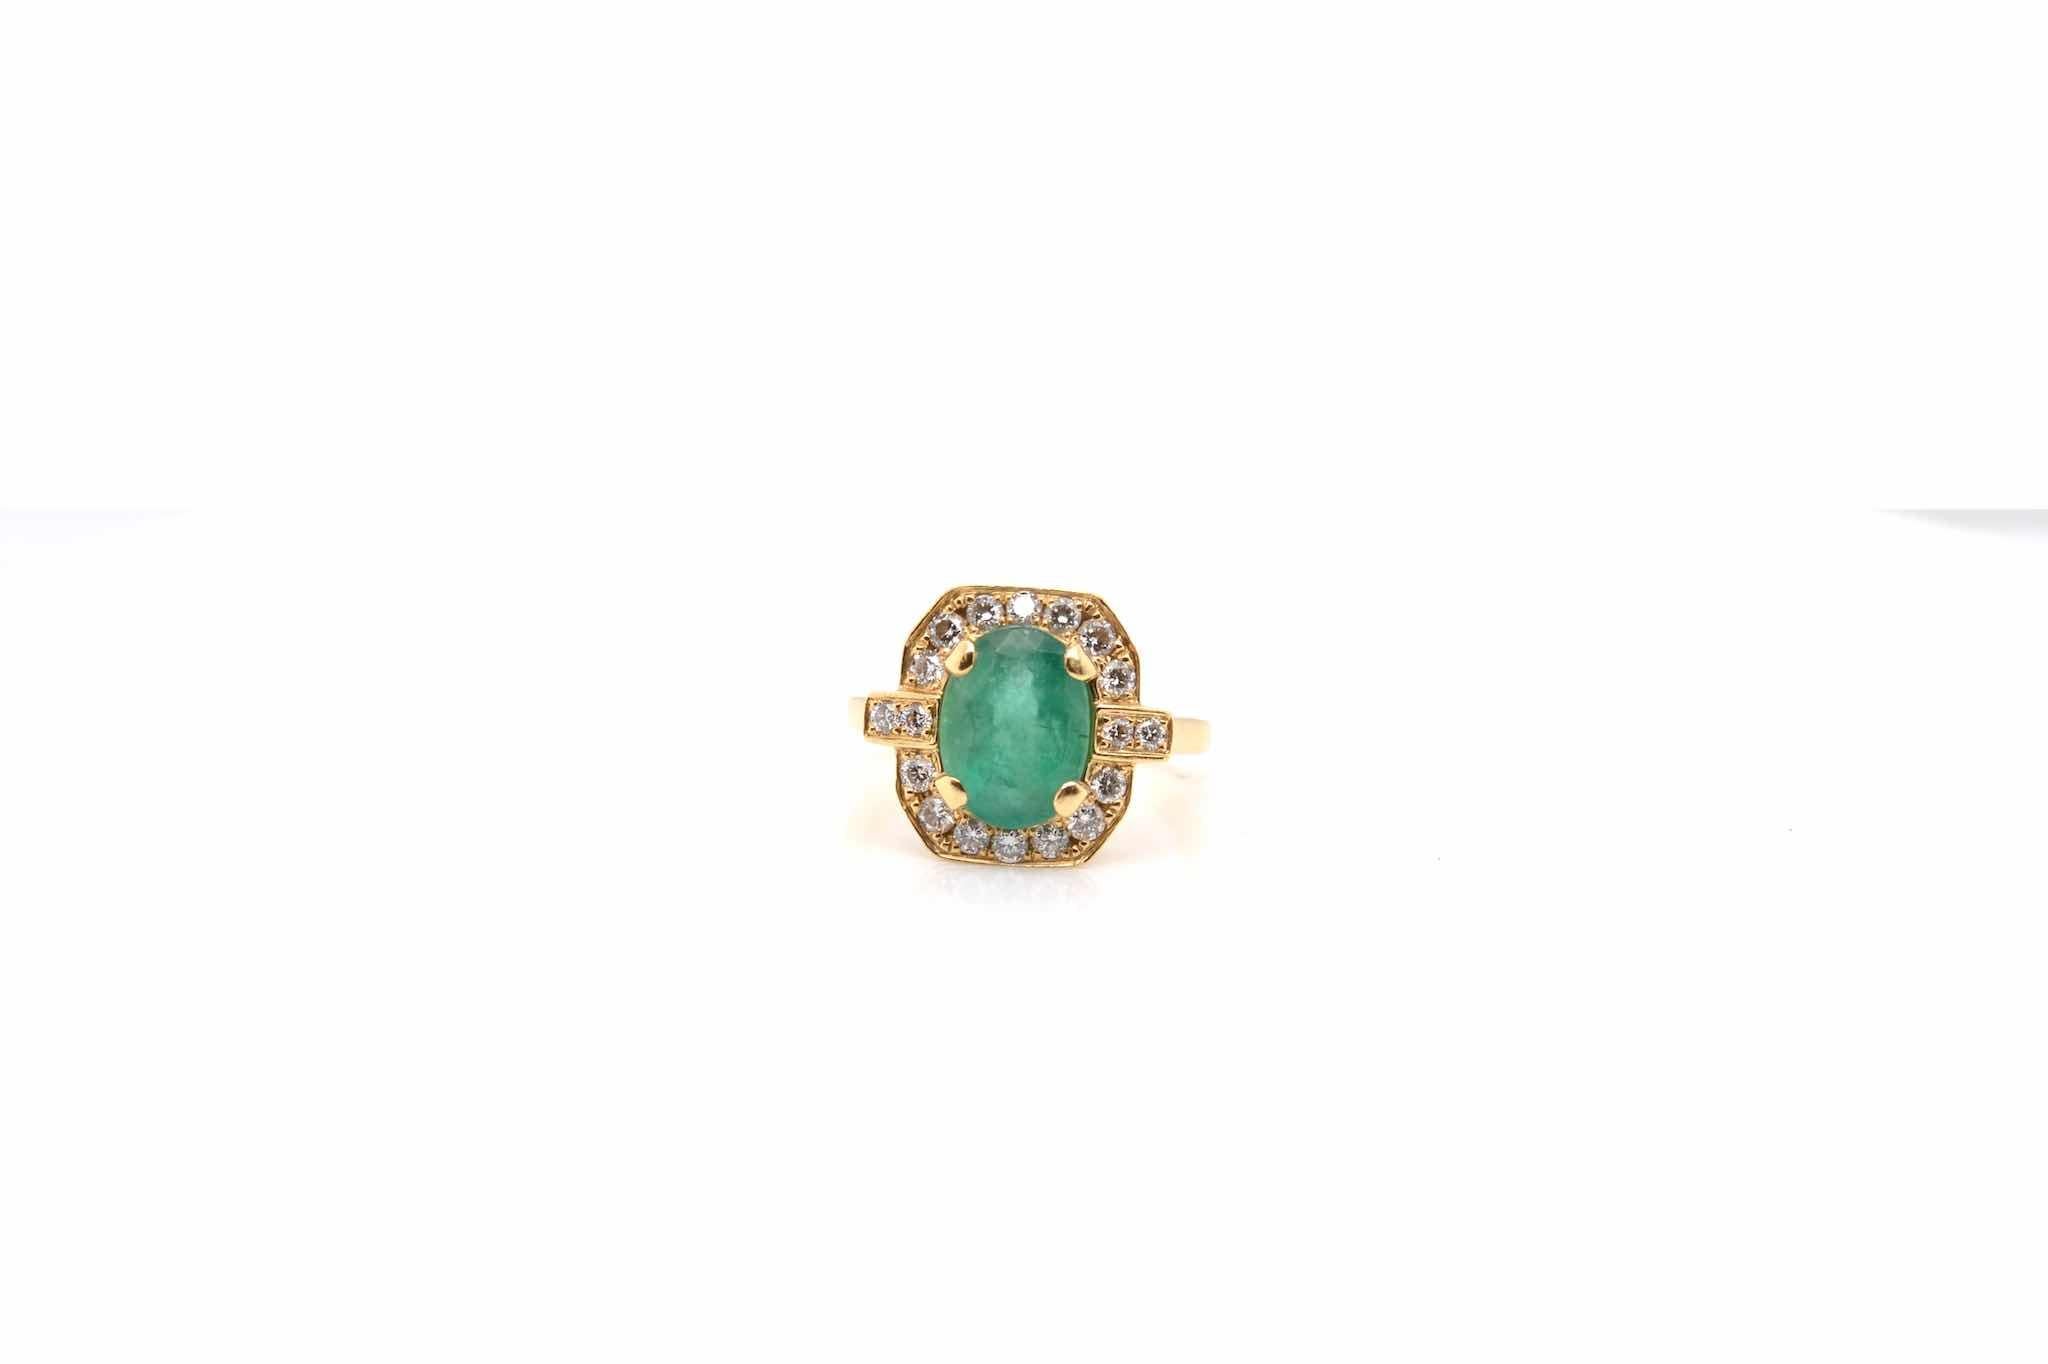 Stones: 1.50 carats emerald and diamonds
brilliant cuts for a total weight of 0.30 carat.
Material: 18k yellow gold
Dimensions: 1.4 cm length on finger
Weight: 5.3g
Size: 51 (free sizing)
Certificate
Ref. : 24814 HD